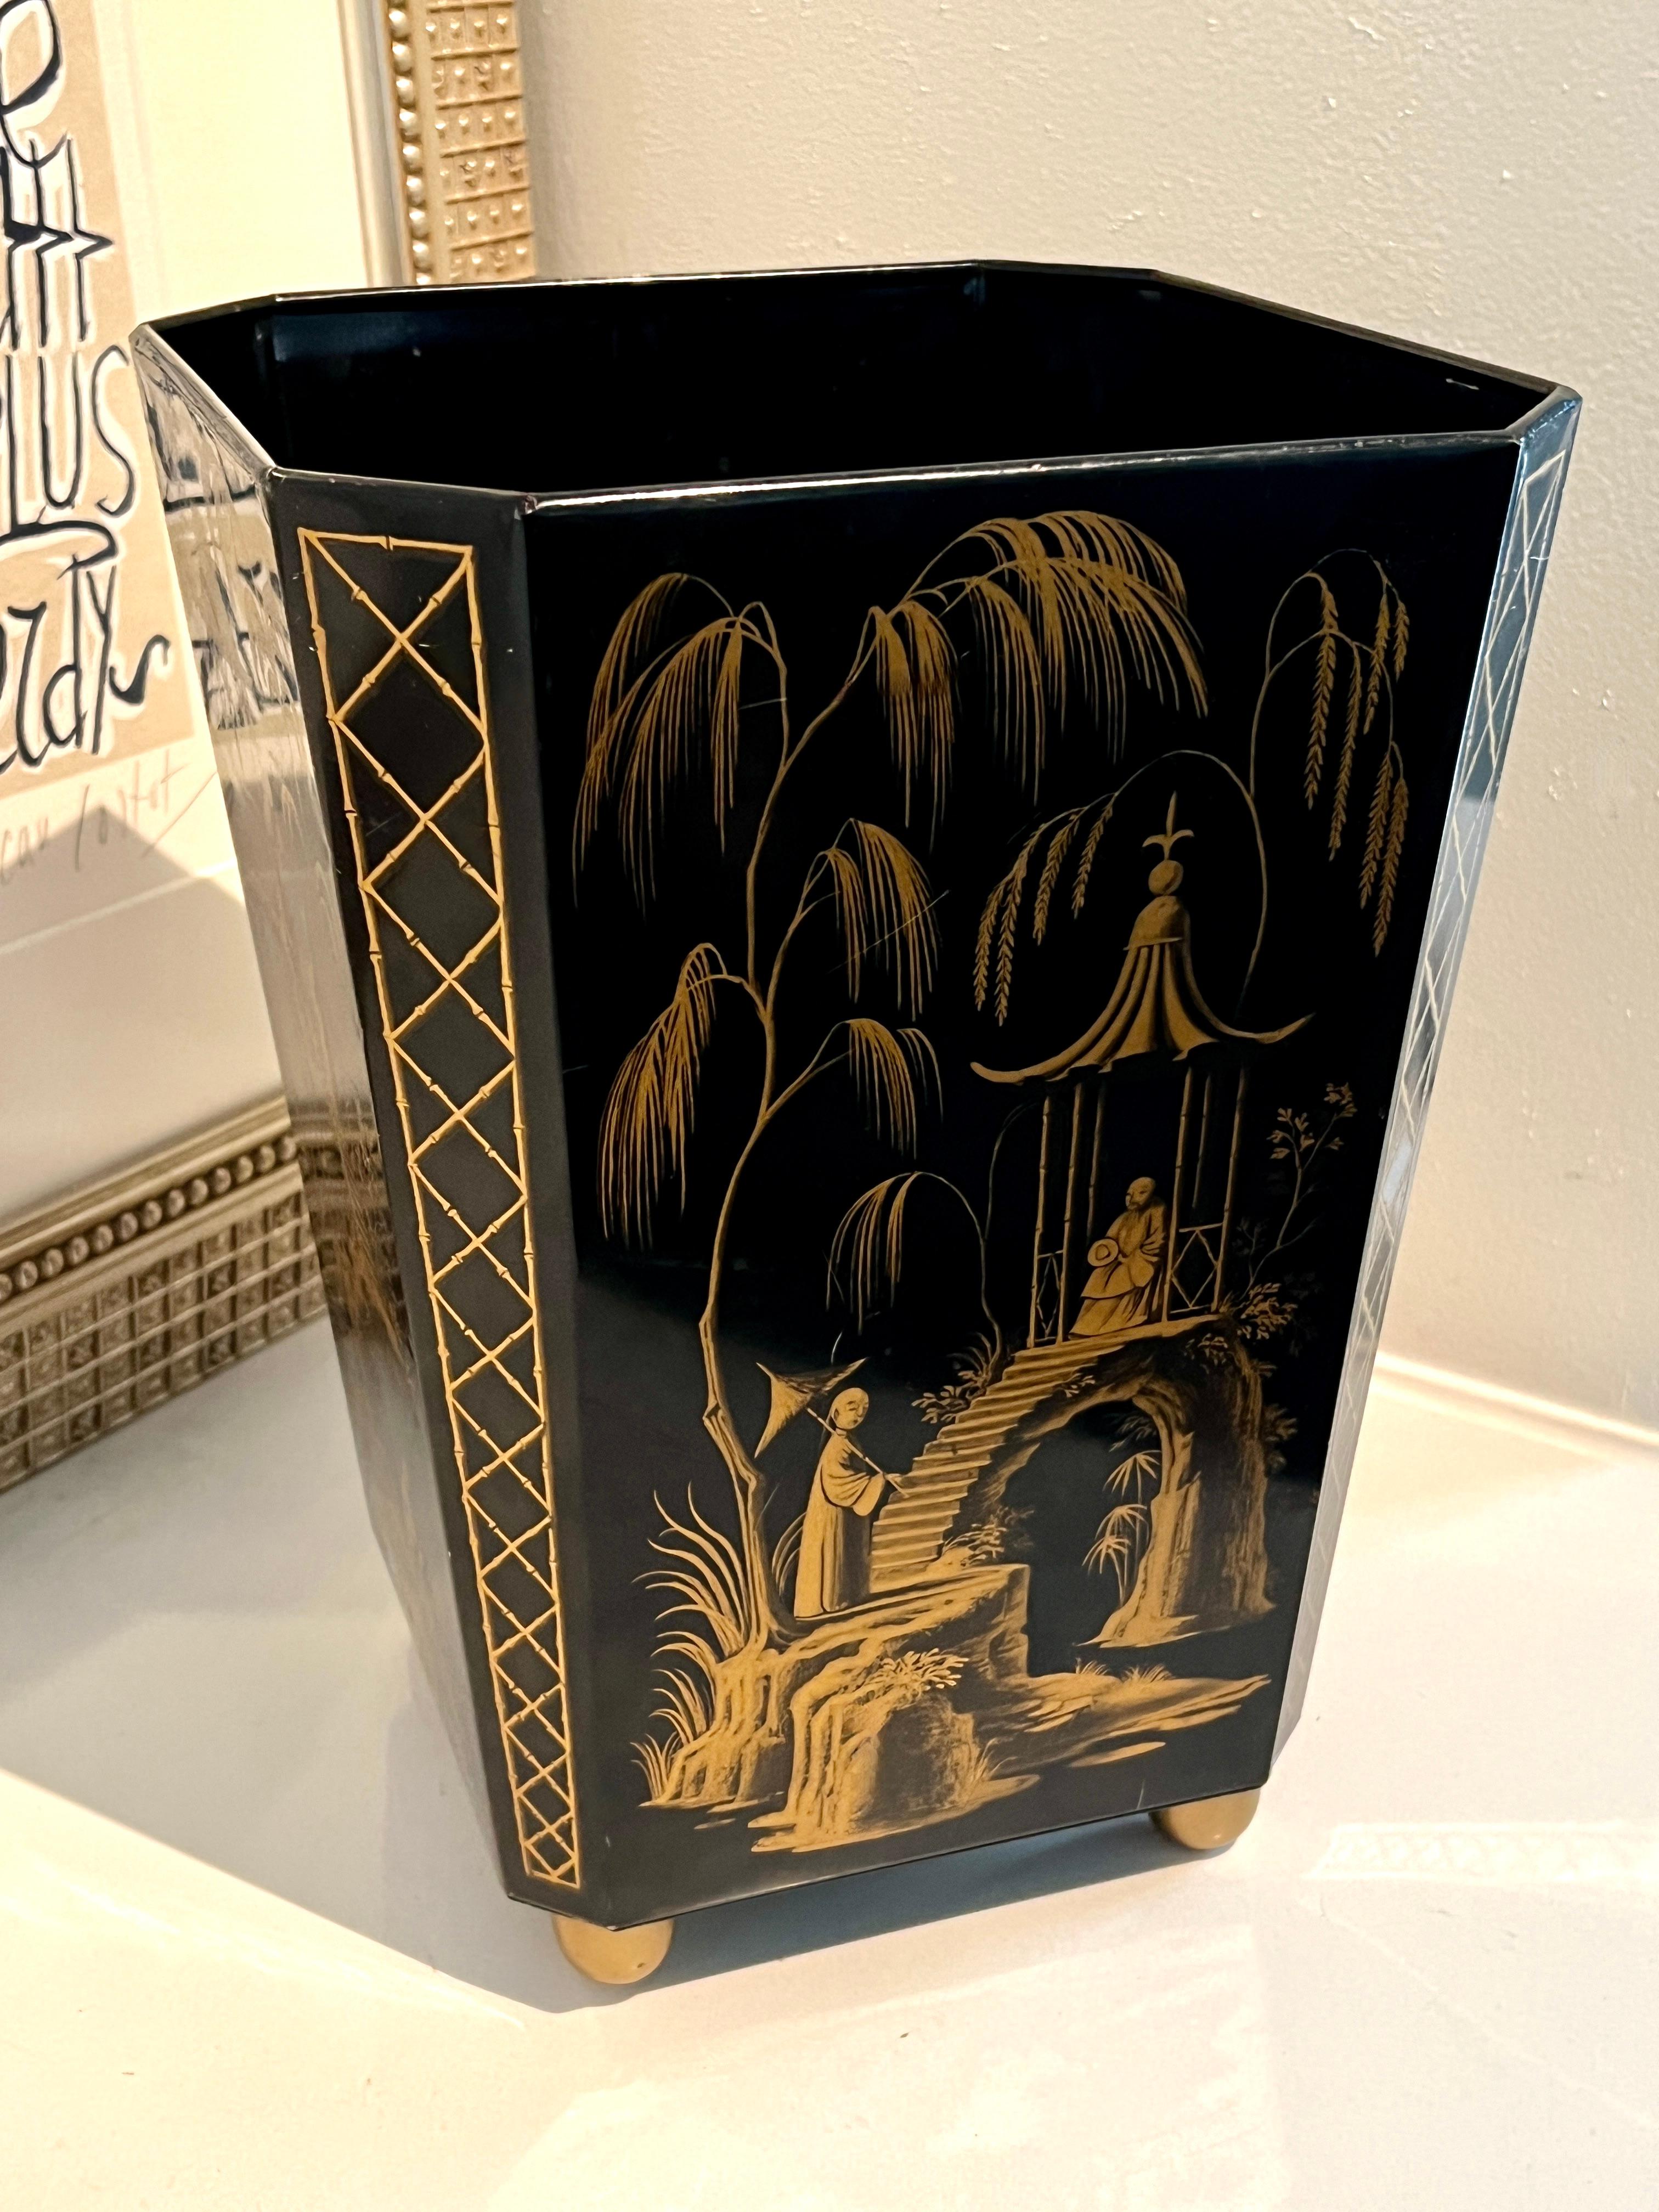 A lovely metal waste or trash can.  The can has a chinoiserie story that works itself around the piece.   A black field with gold imagery.

A wonderful piece and nice compliment to many spaces and especially the powder room, office, or guest